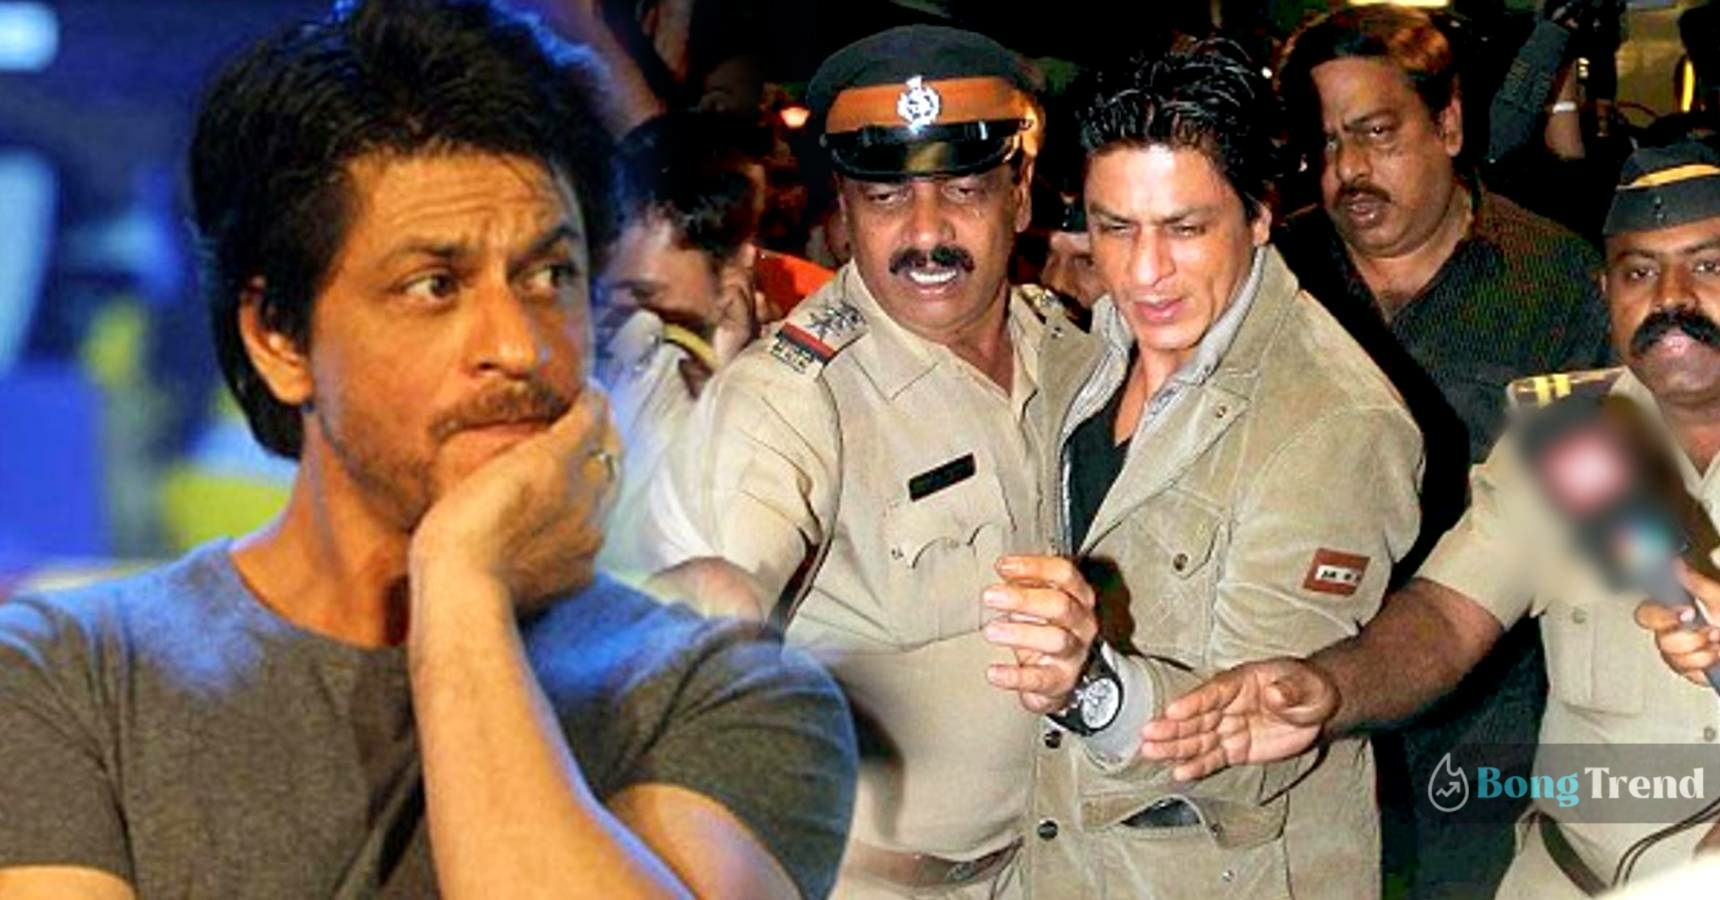 Bollywood superstar Shah Rukh Khan was stopped at Mumbai Airport over luxury watches